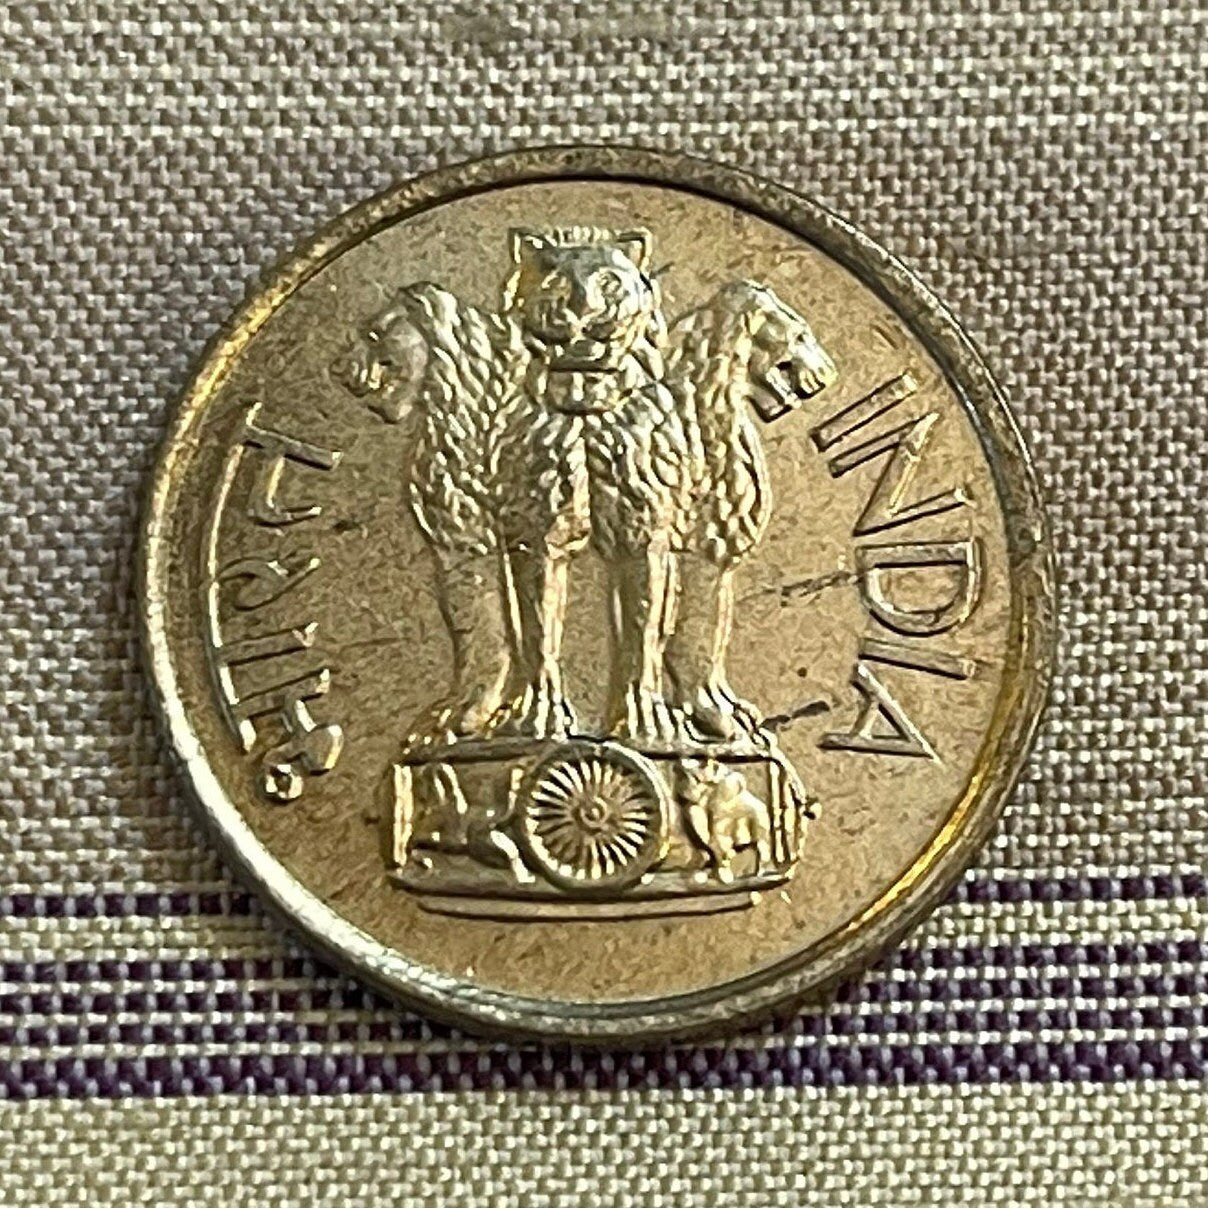 Ashoka Lion Capitol & Lotus Blossom 20 Paise India Authentic Coin Money for Jewelry and Craft Making